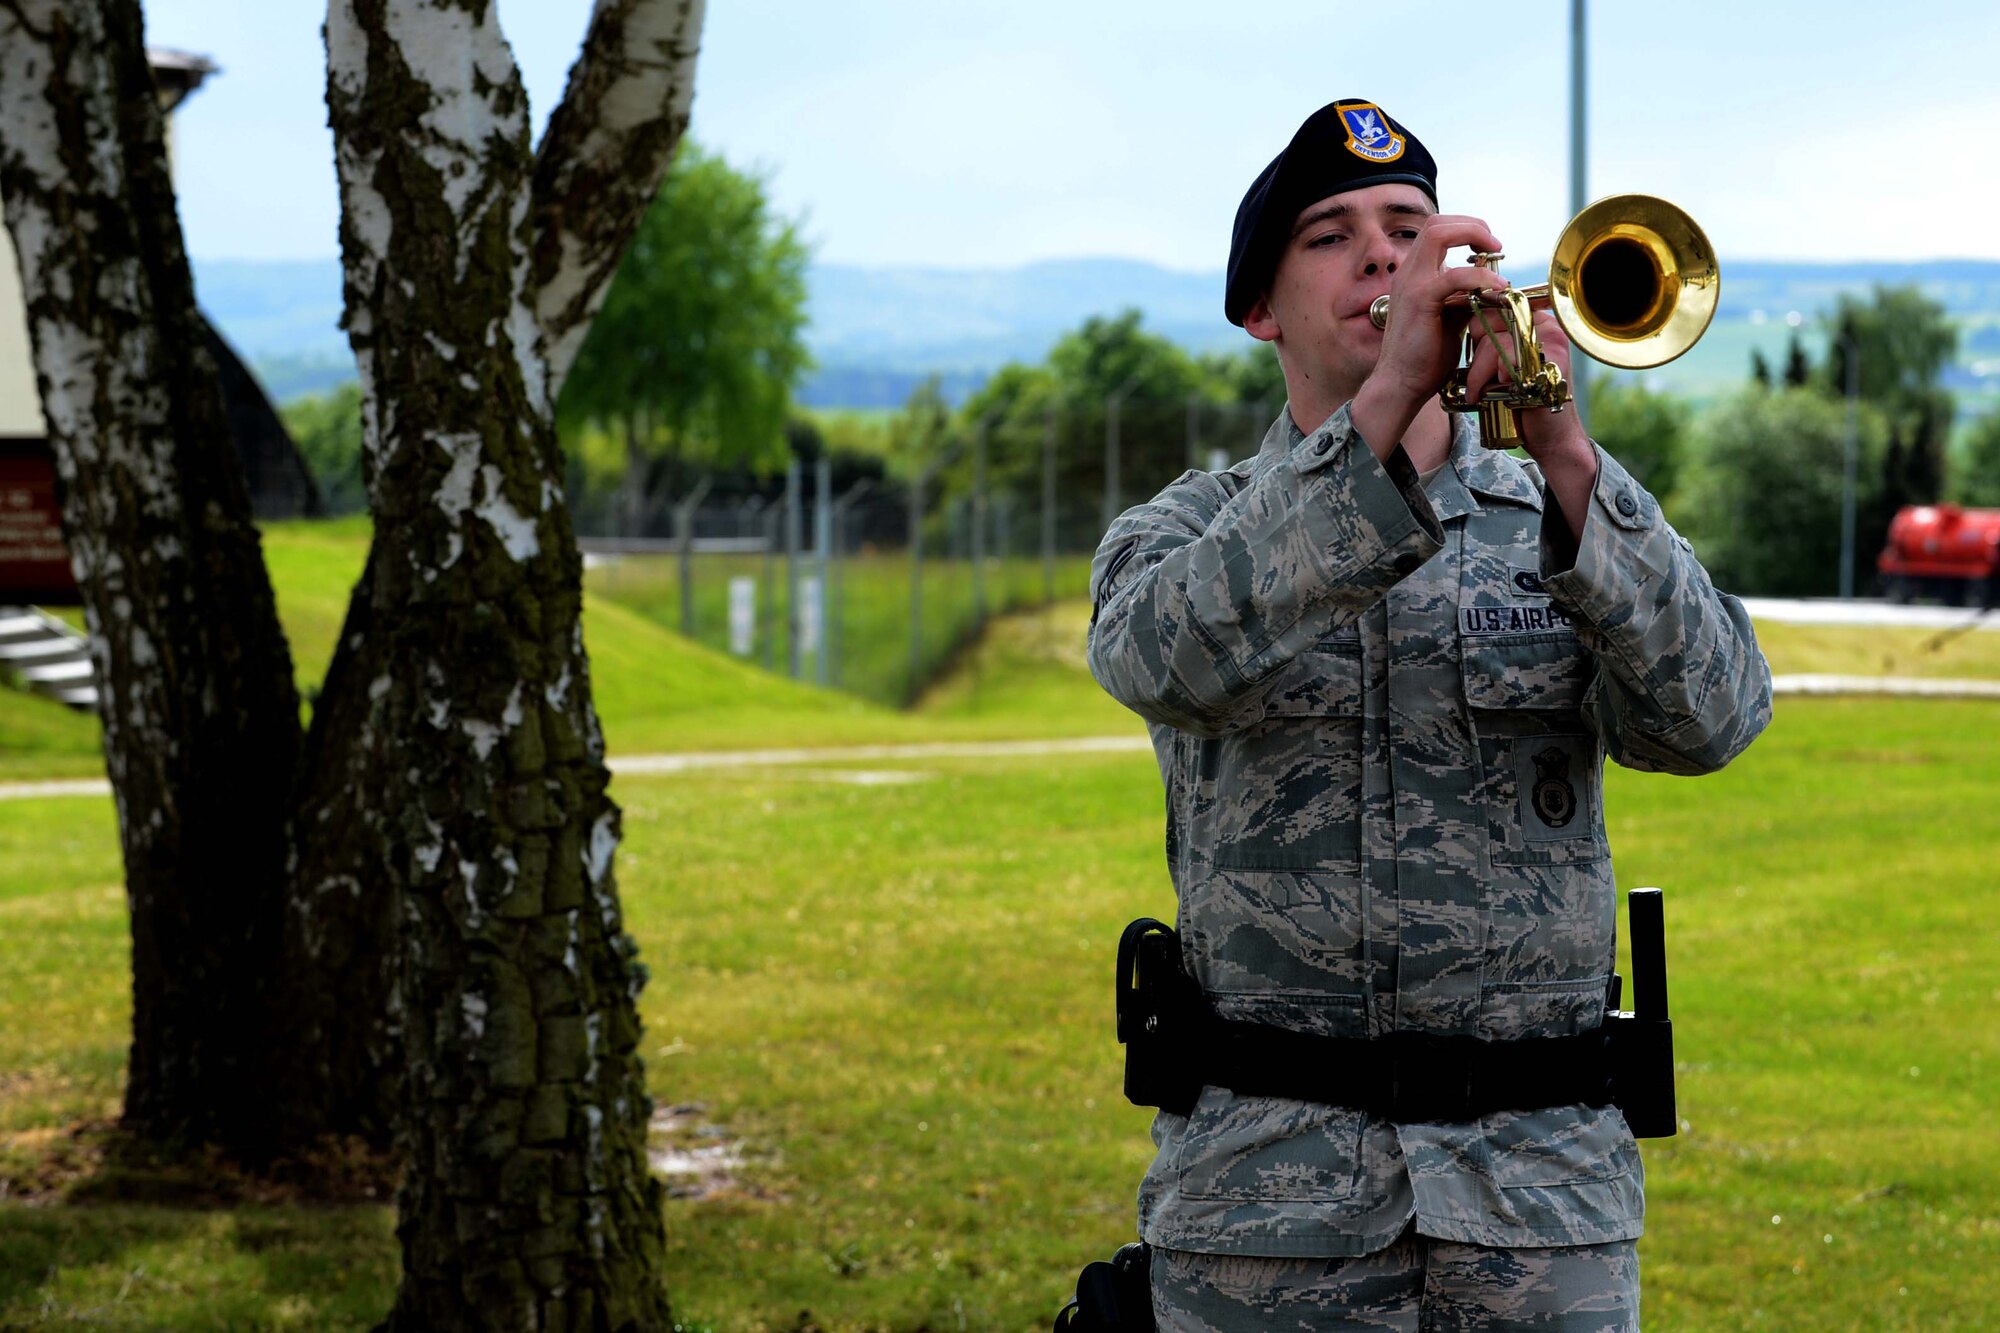 U.S. Air Force Airman 1st Class Dyllan Lewis, 52nd Security Forces Squadron entry controller, plays taps during a National Police Week retreat ceremony at Spangdahlem Air Base, Germany, May 12, 2014. The other bases events included a ruck march, jail and bail, defender decathlon and a security forces display. (U.S. Air Force photo by Airman 1st Class Kyle Gese/Released)